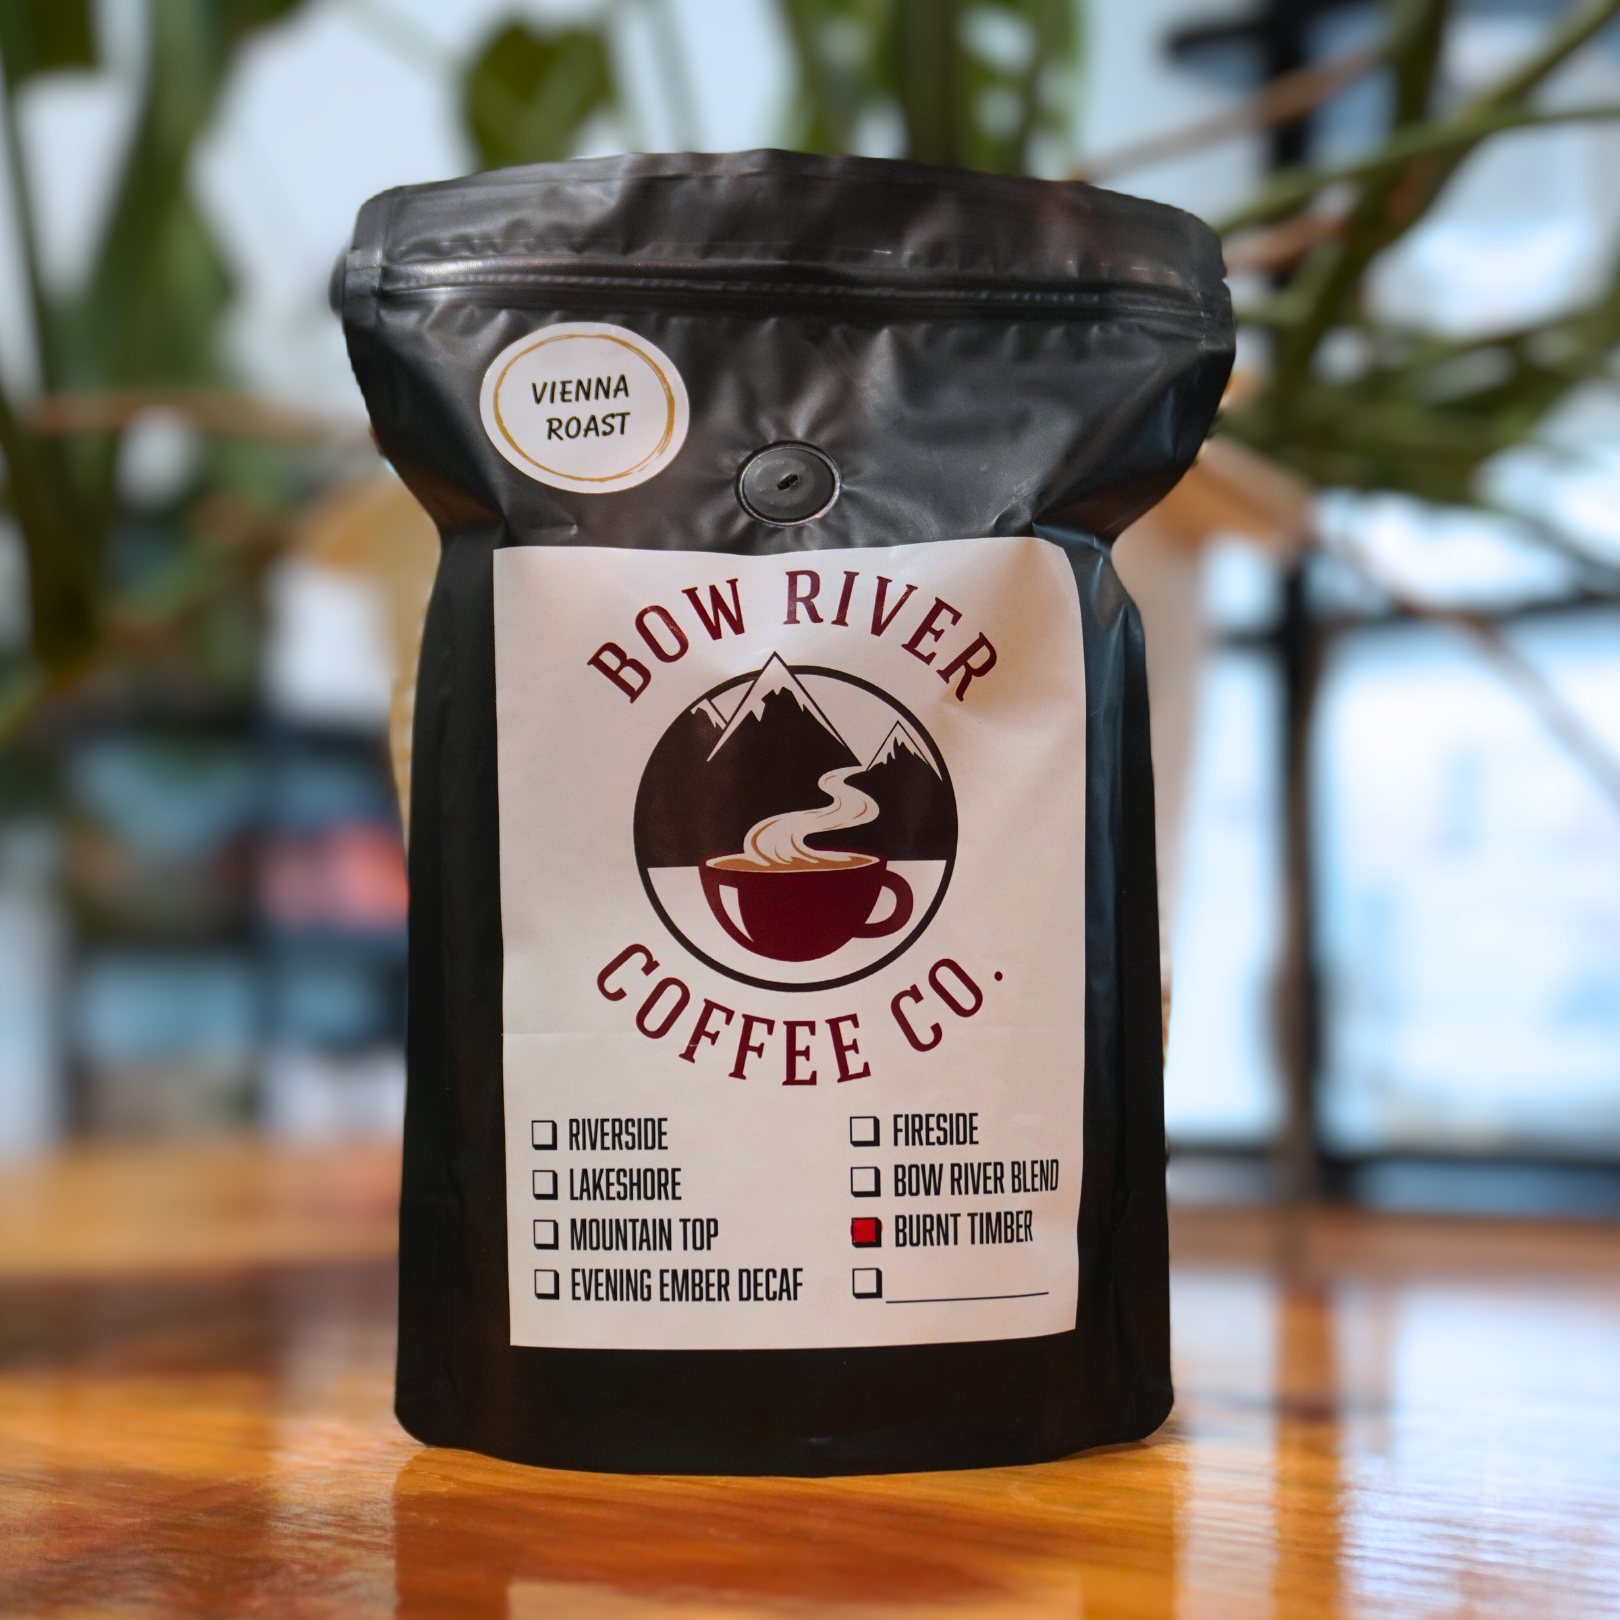 Bow River Coffee Co. Burnt Timber Coffee Beans